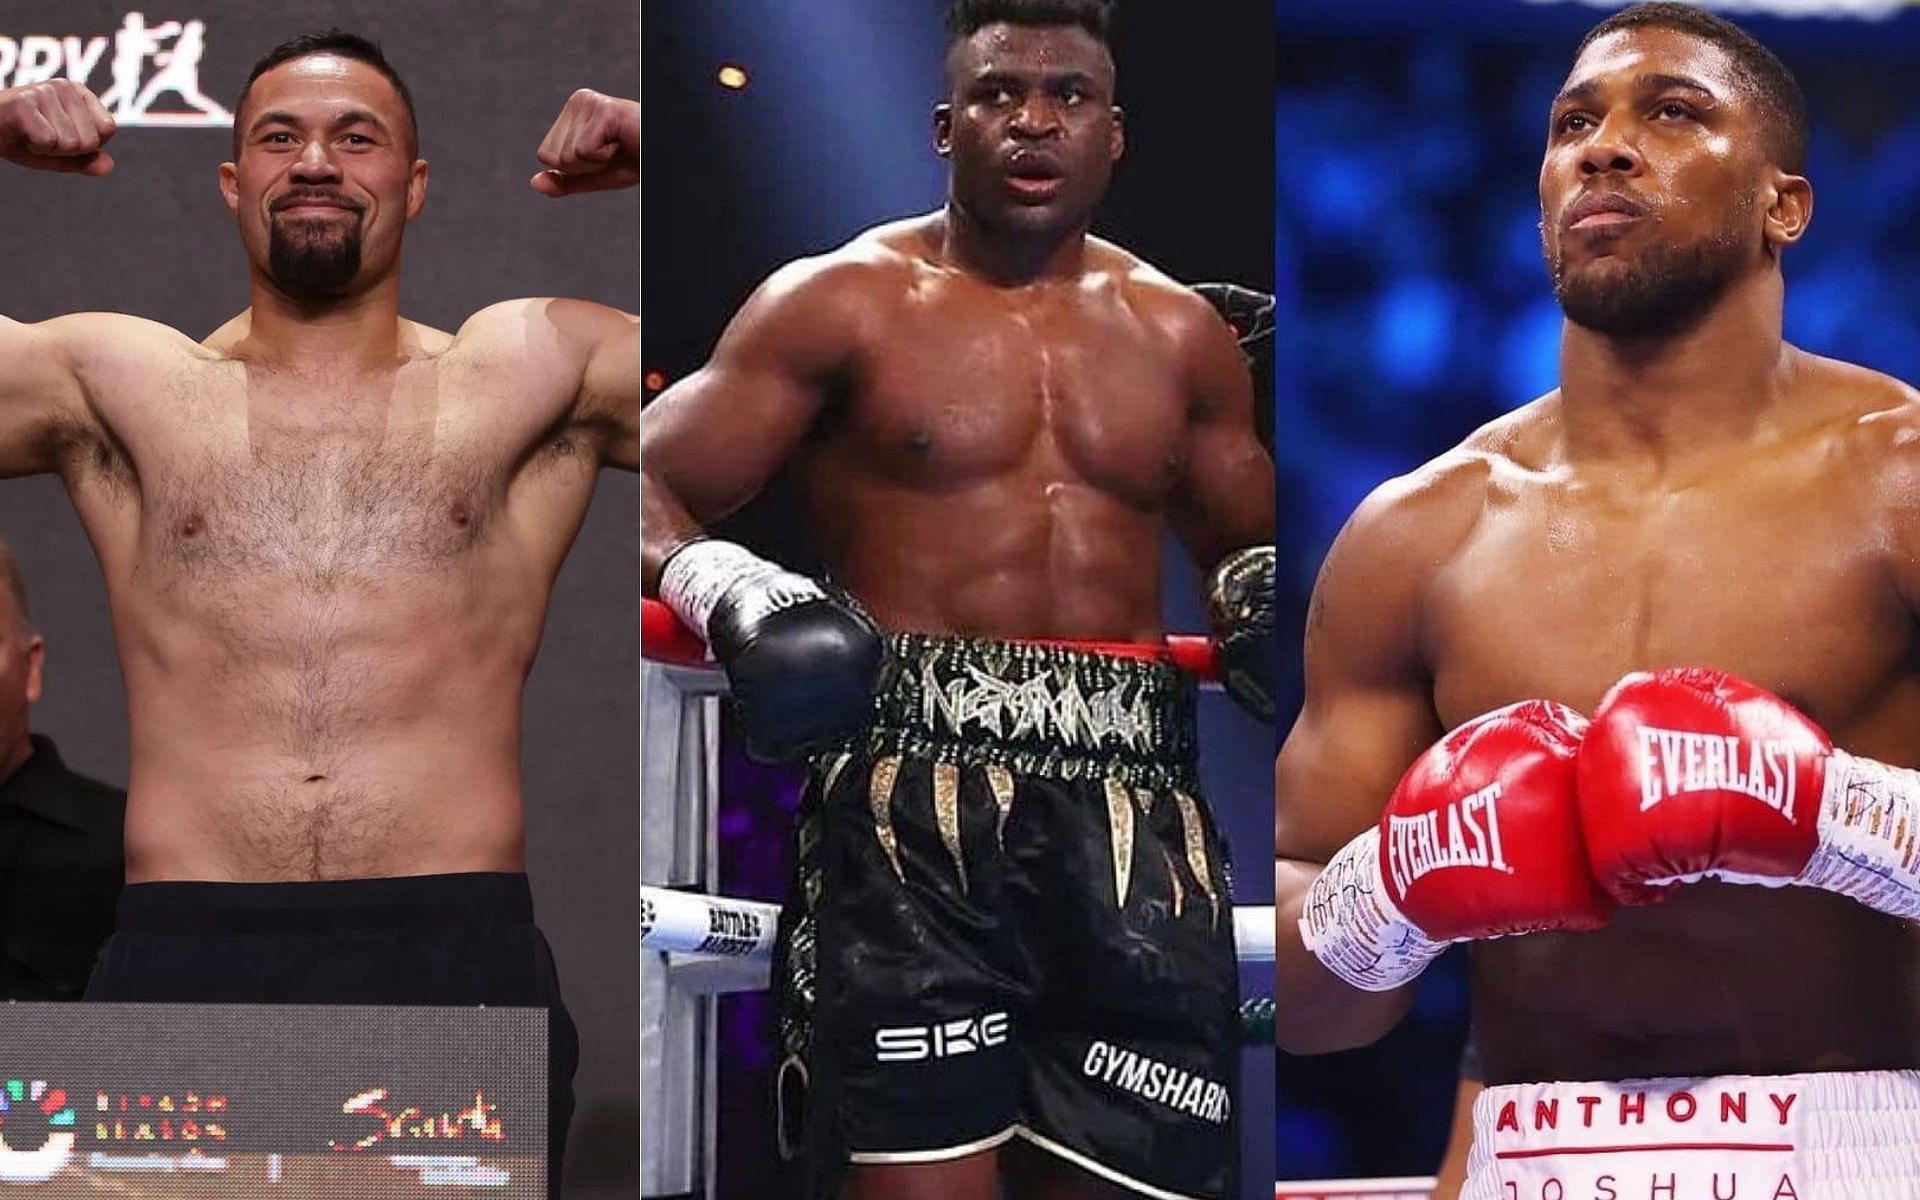 Joseph Parker (left) hints at possibly fighting on the Francis Ngannou (middle) vs. Anthony Joshua (right) event